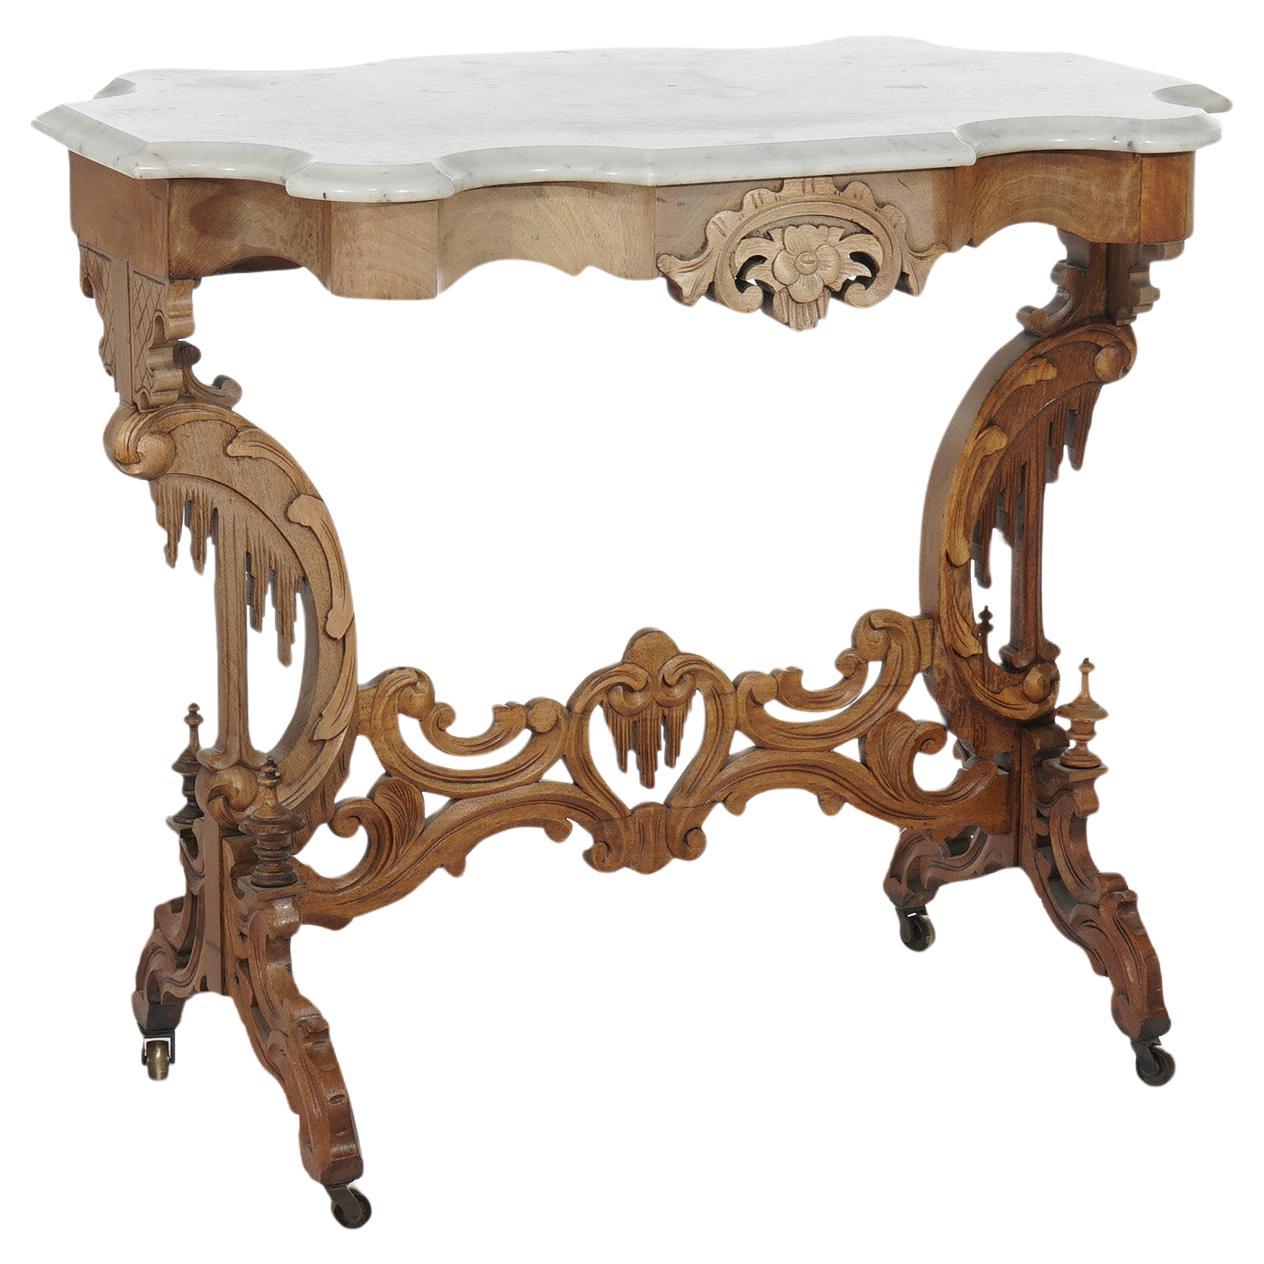 Antique Rococo-Gothic Carved Walnut Marble Top Parlor Table Circa 1880